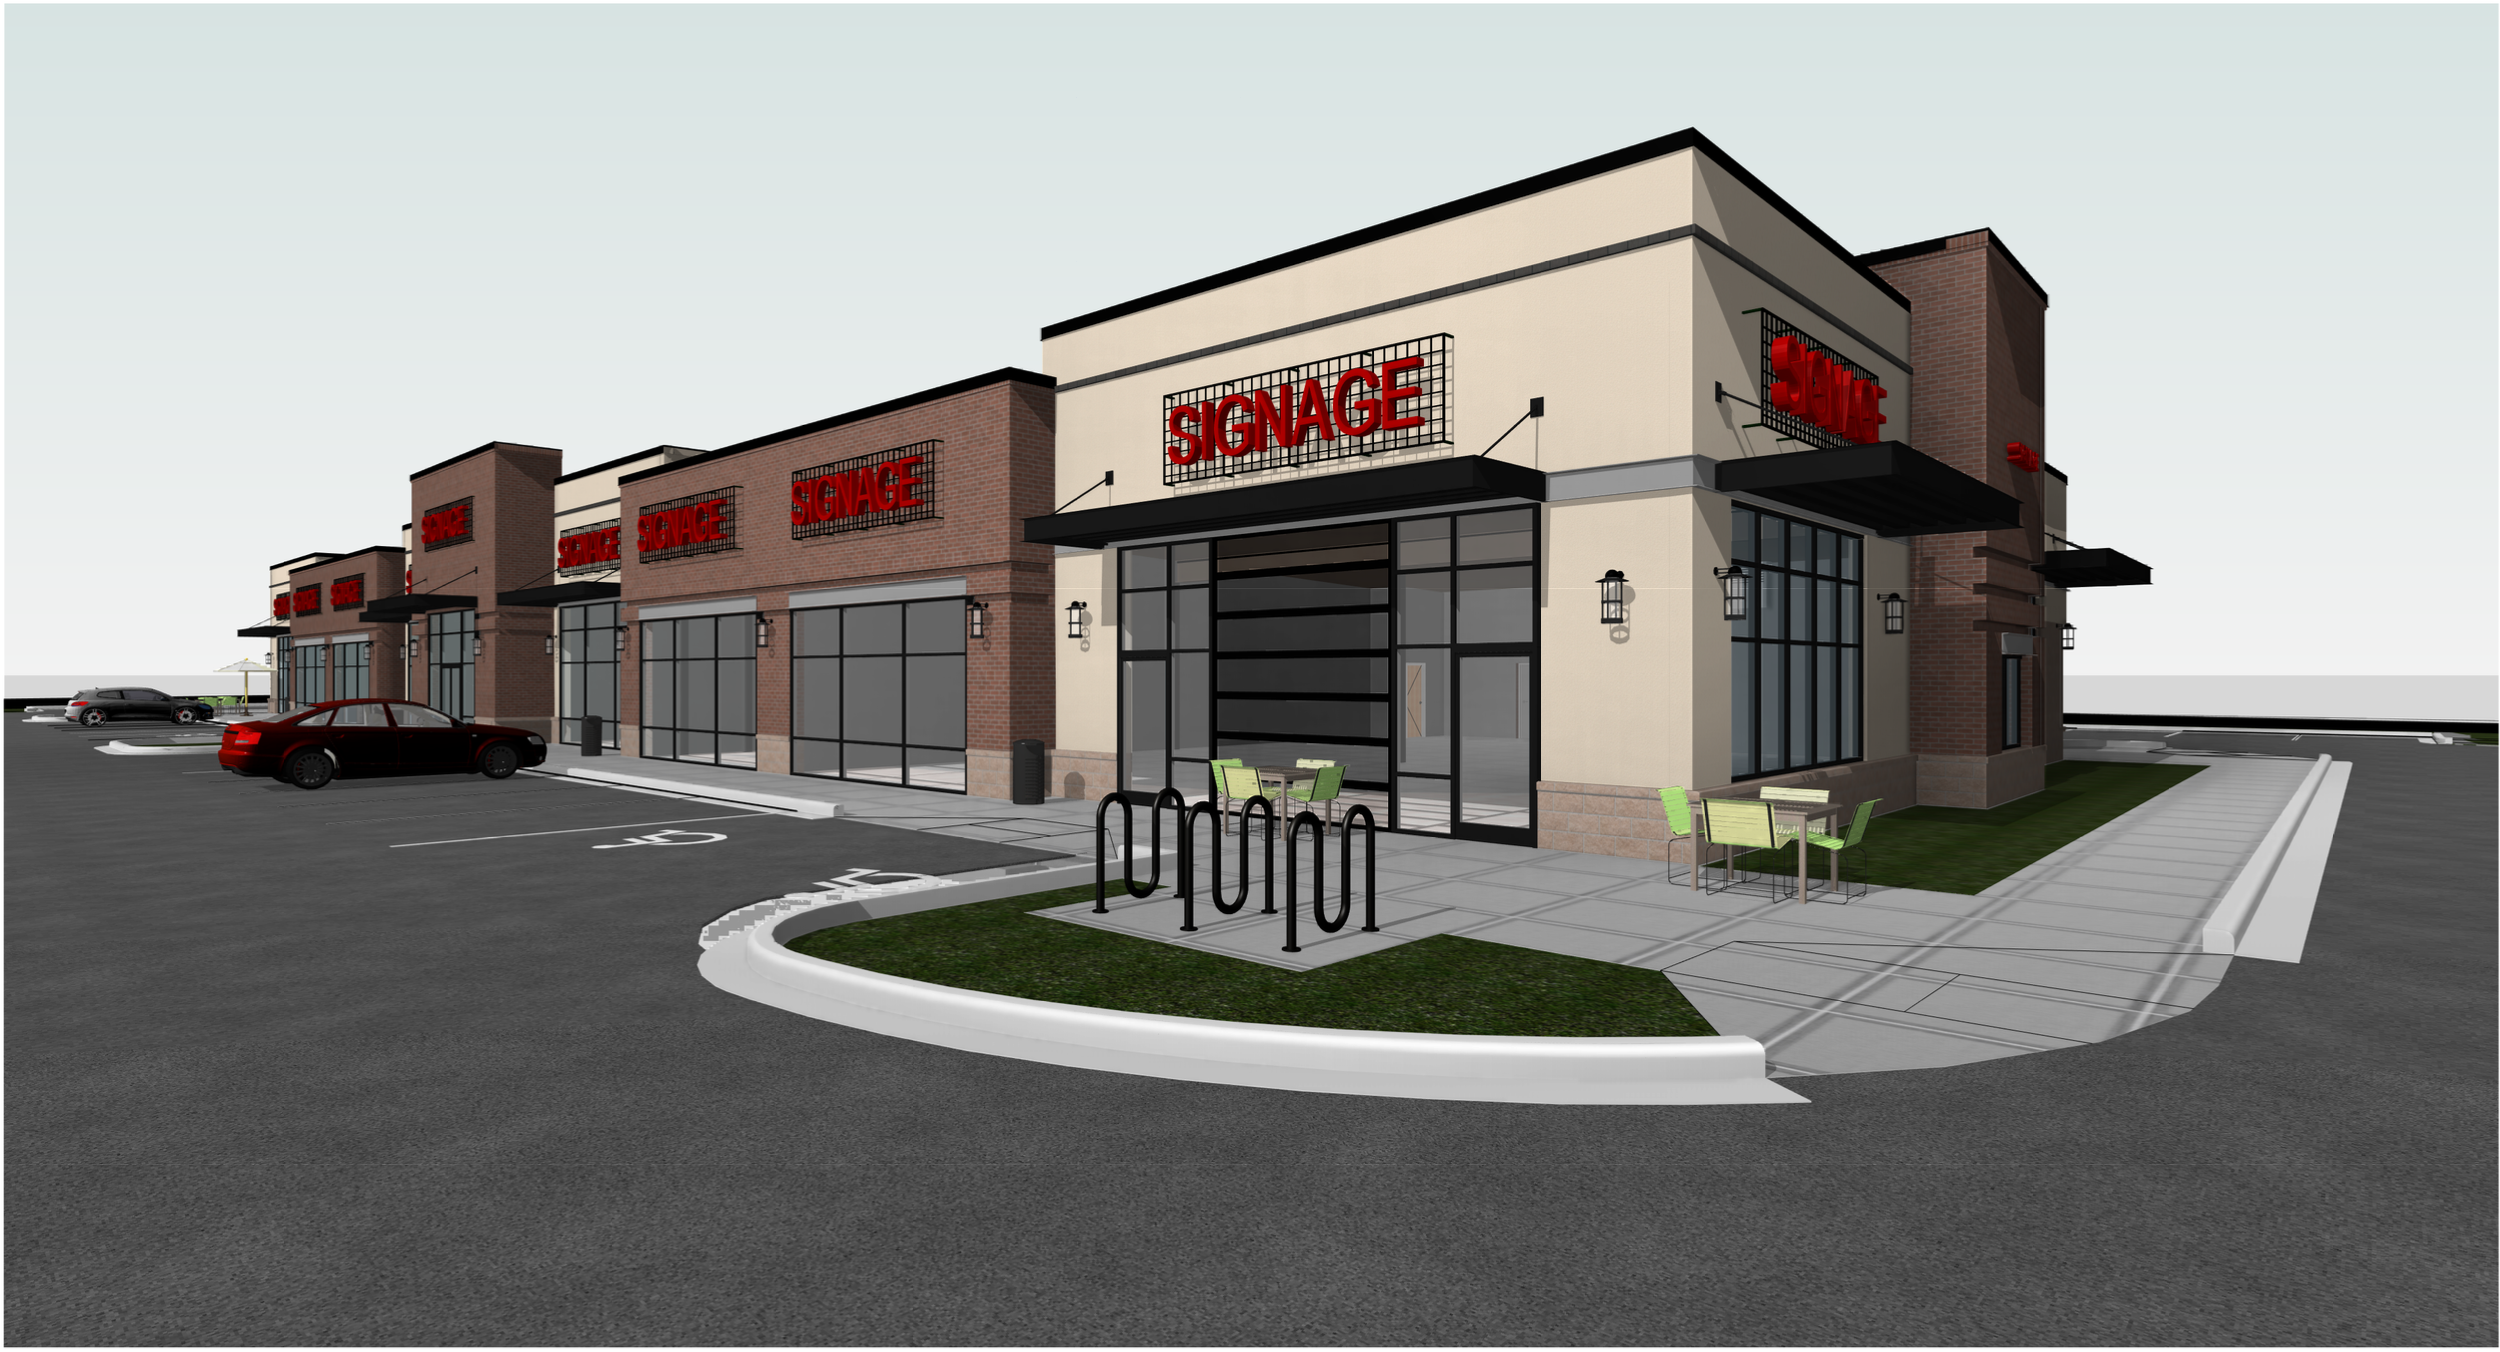 Rendering of Southmoor Retail Plaza in Longmont, CO